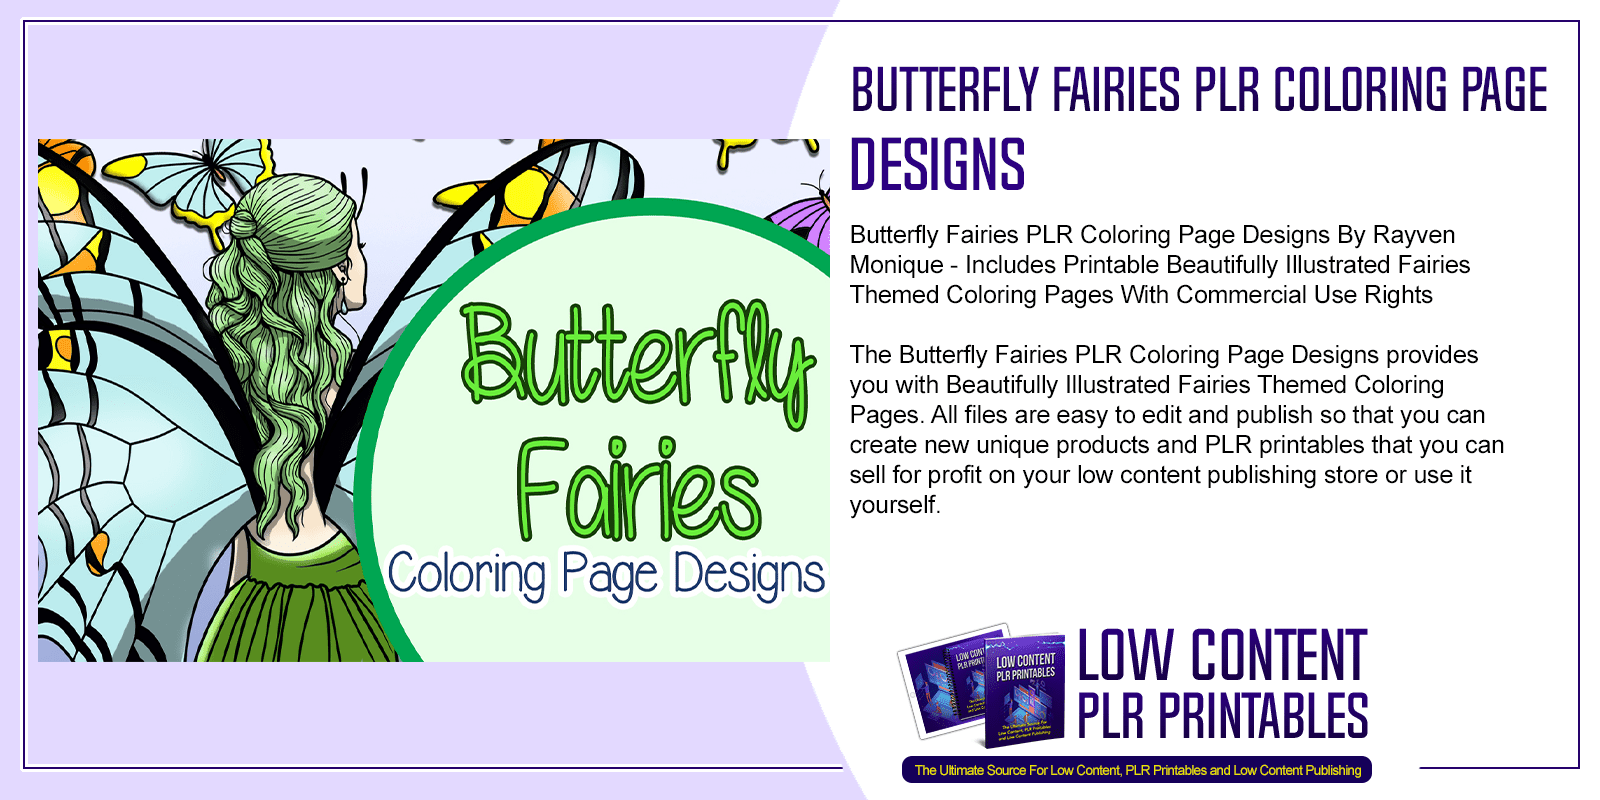 Butterfly Fairies PLR Coloring Page Designs 2